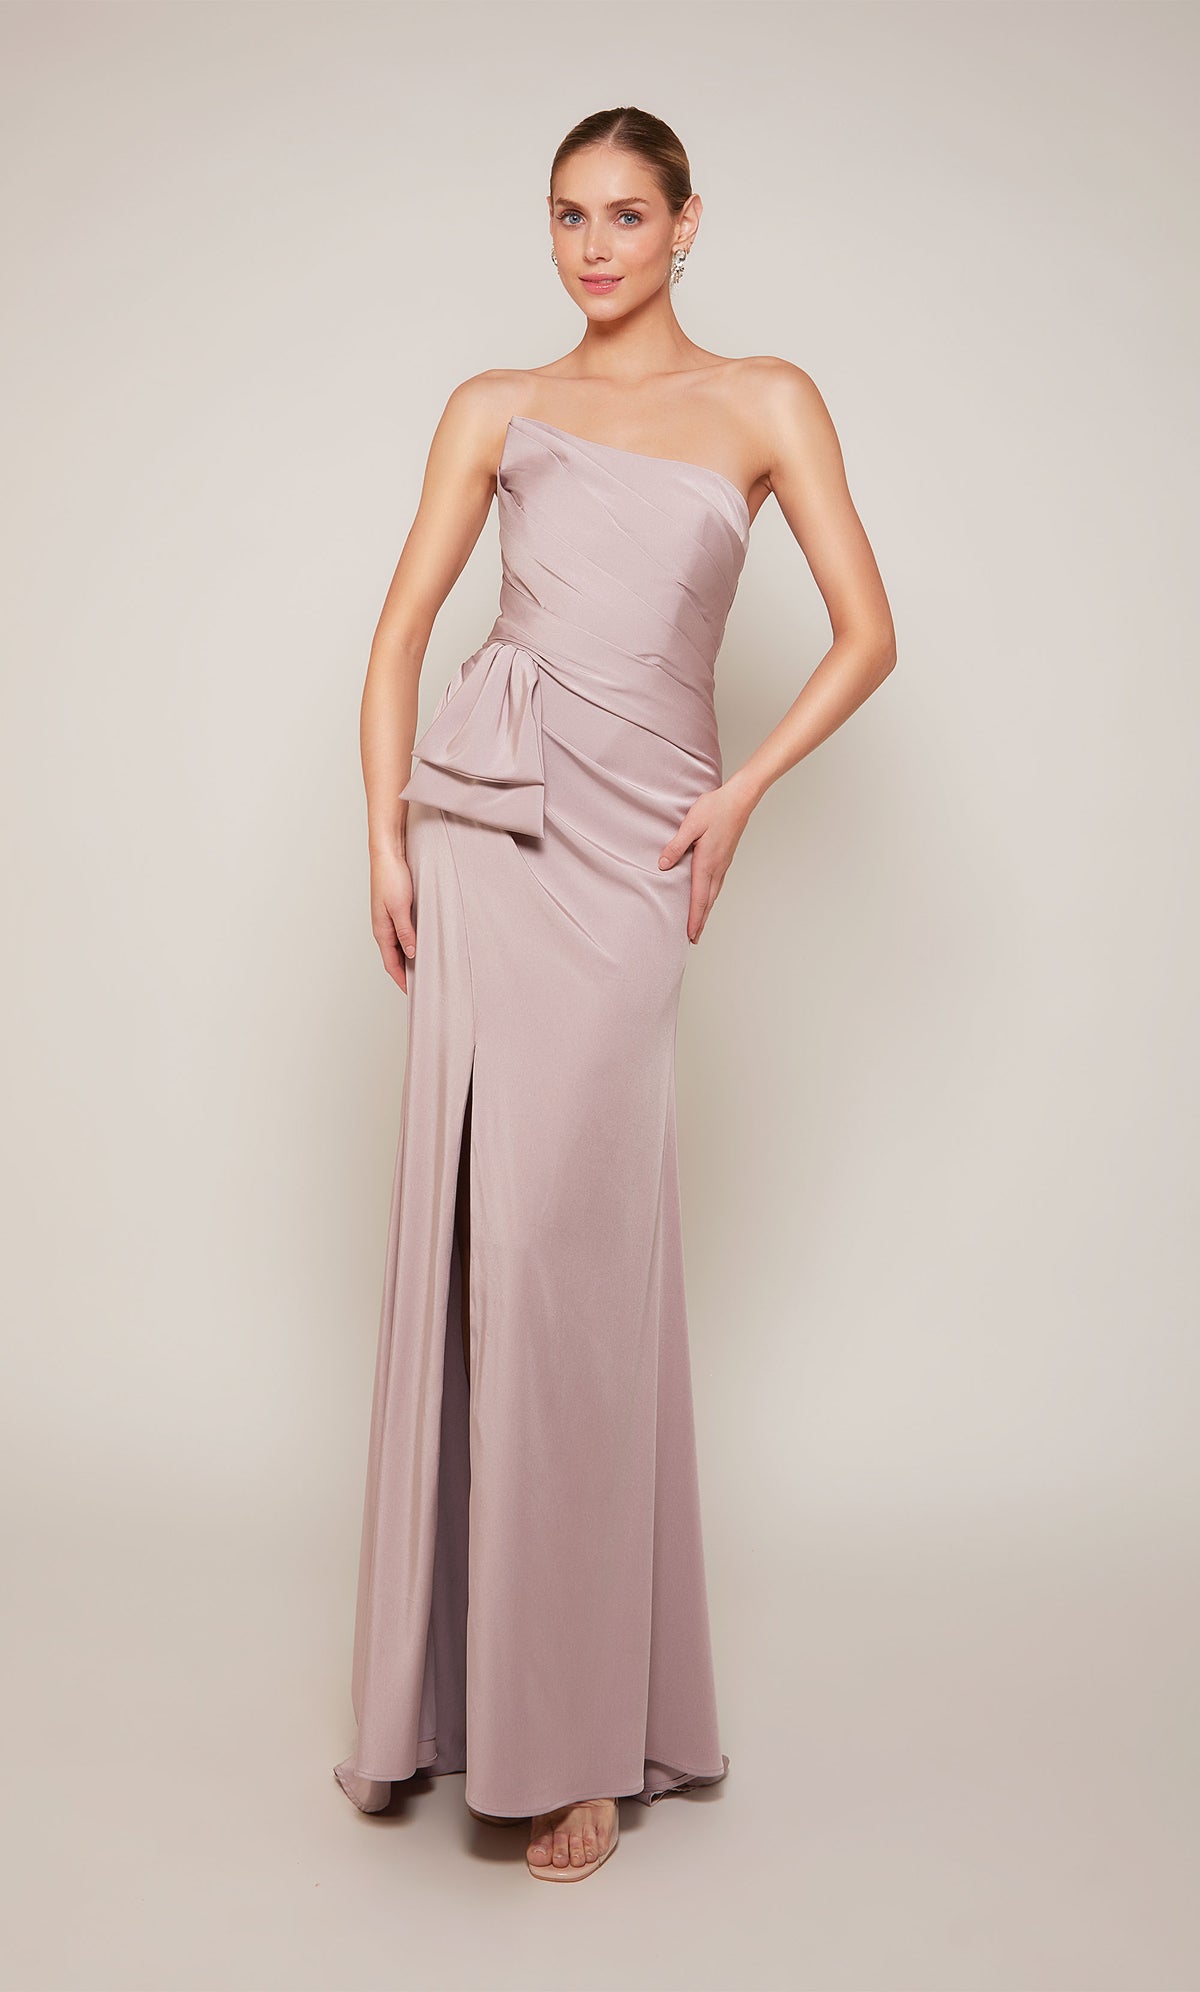 A strapless designer gown highlighting a pleated bodice, a bow at the waistline, and a side slit in the color rosewood.